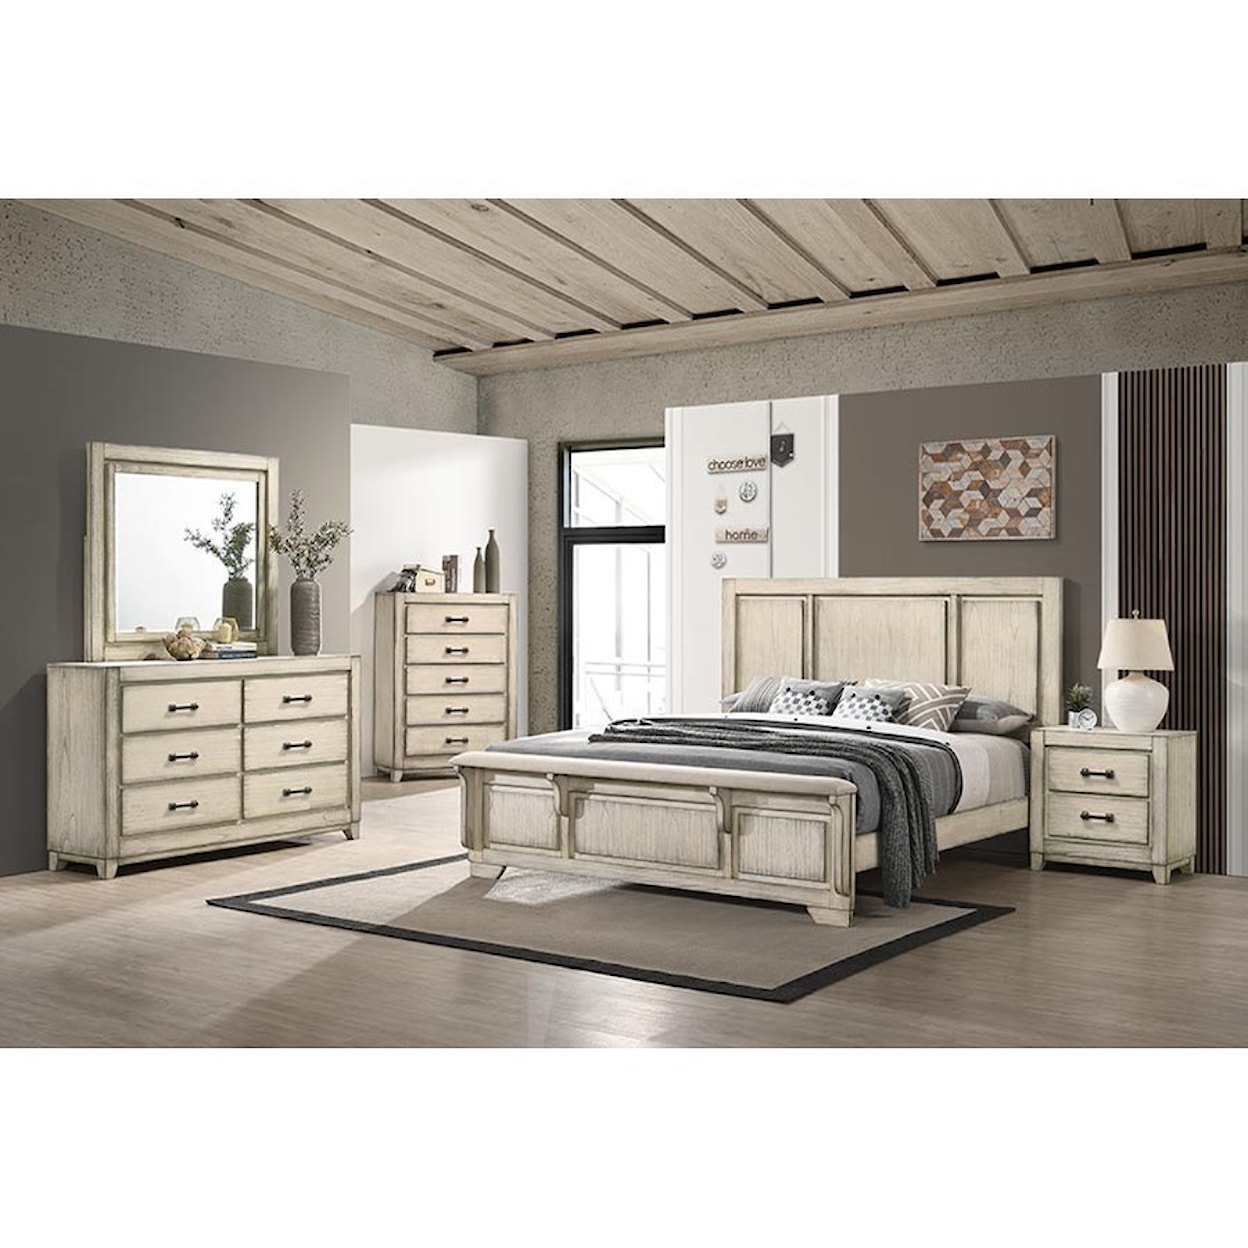 New Classic Furniture Ashland Queen Bedroom Group